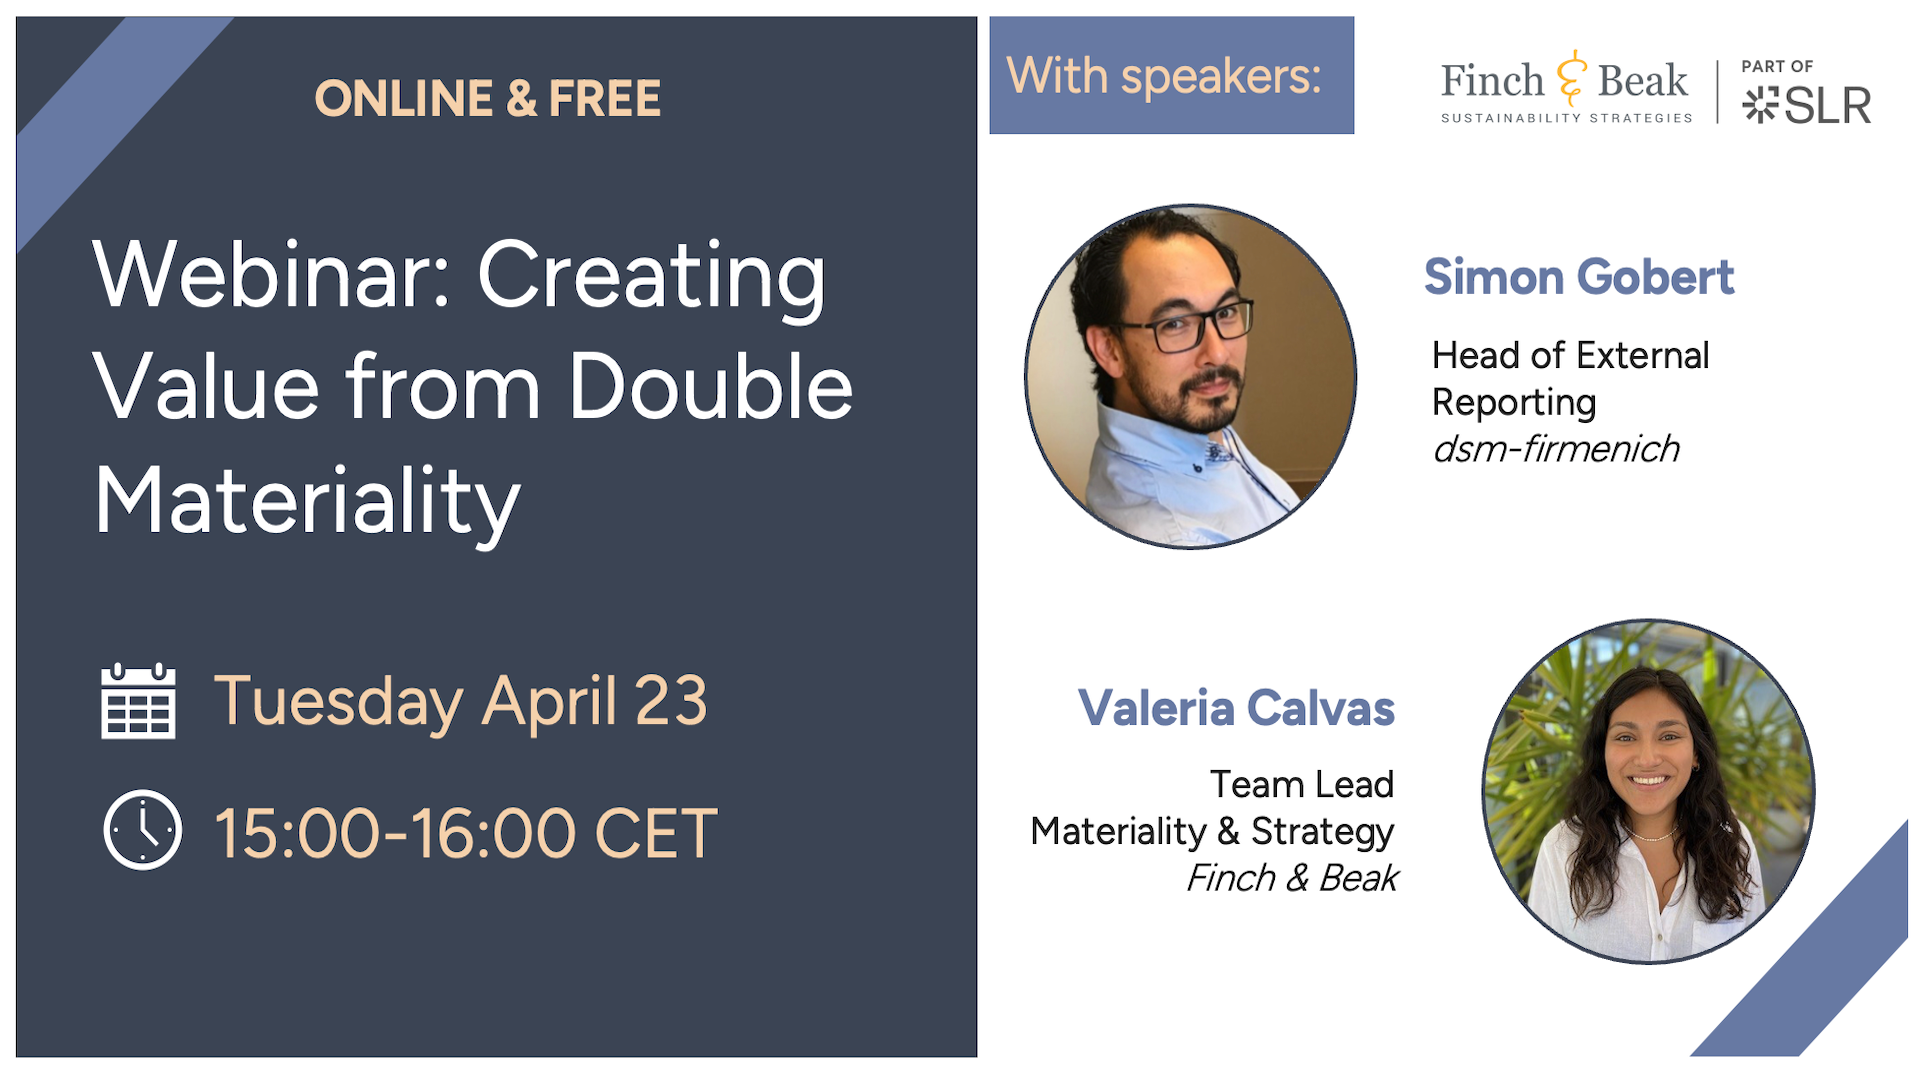 Webinar: Creating Value from Double Materiality